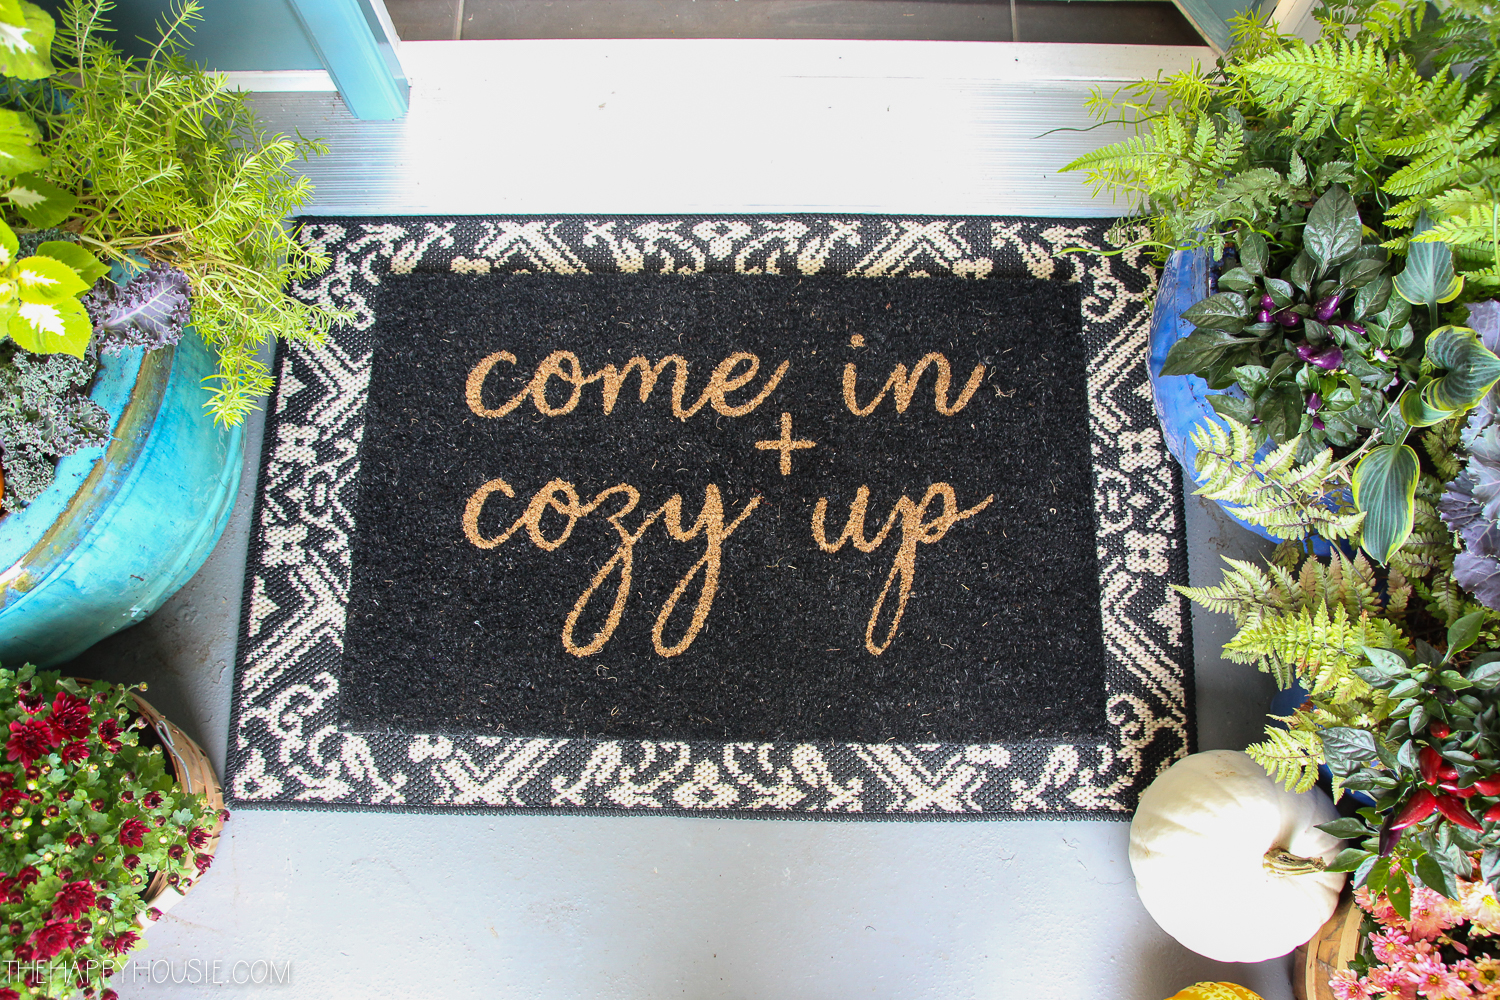 The rug on the porch that says come in and cozy up.